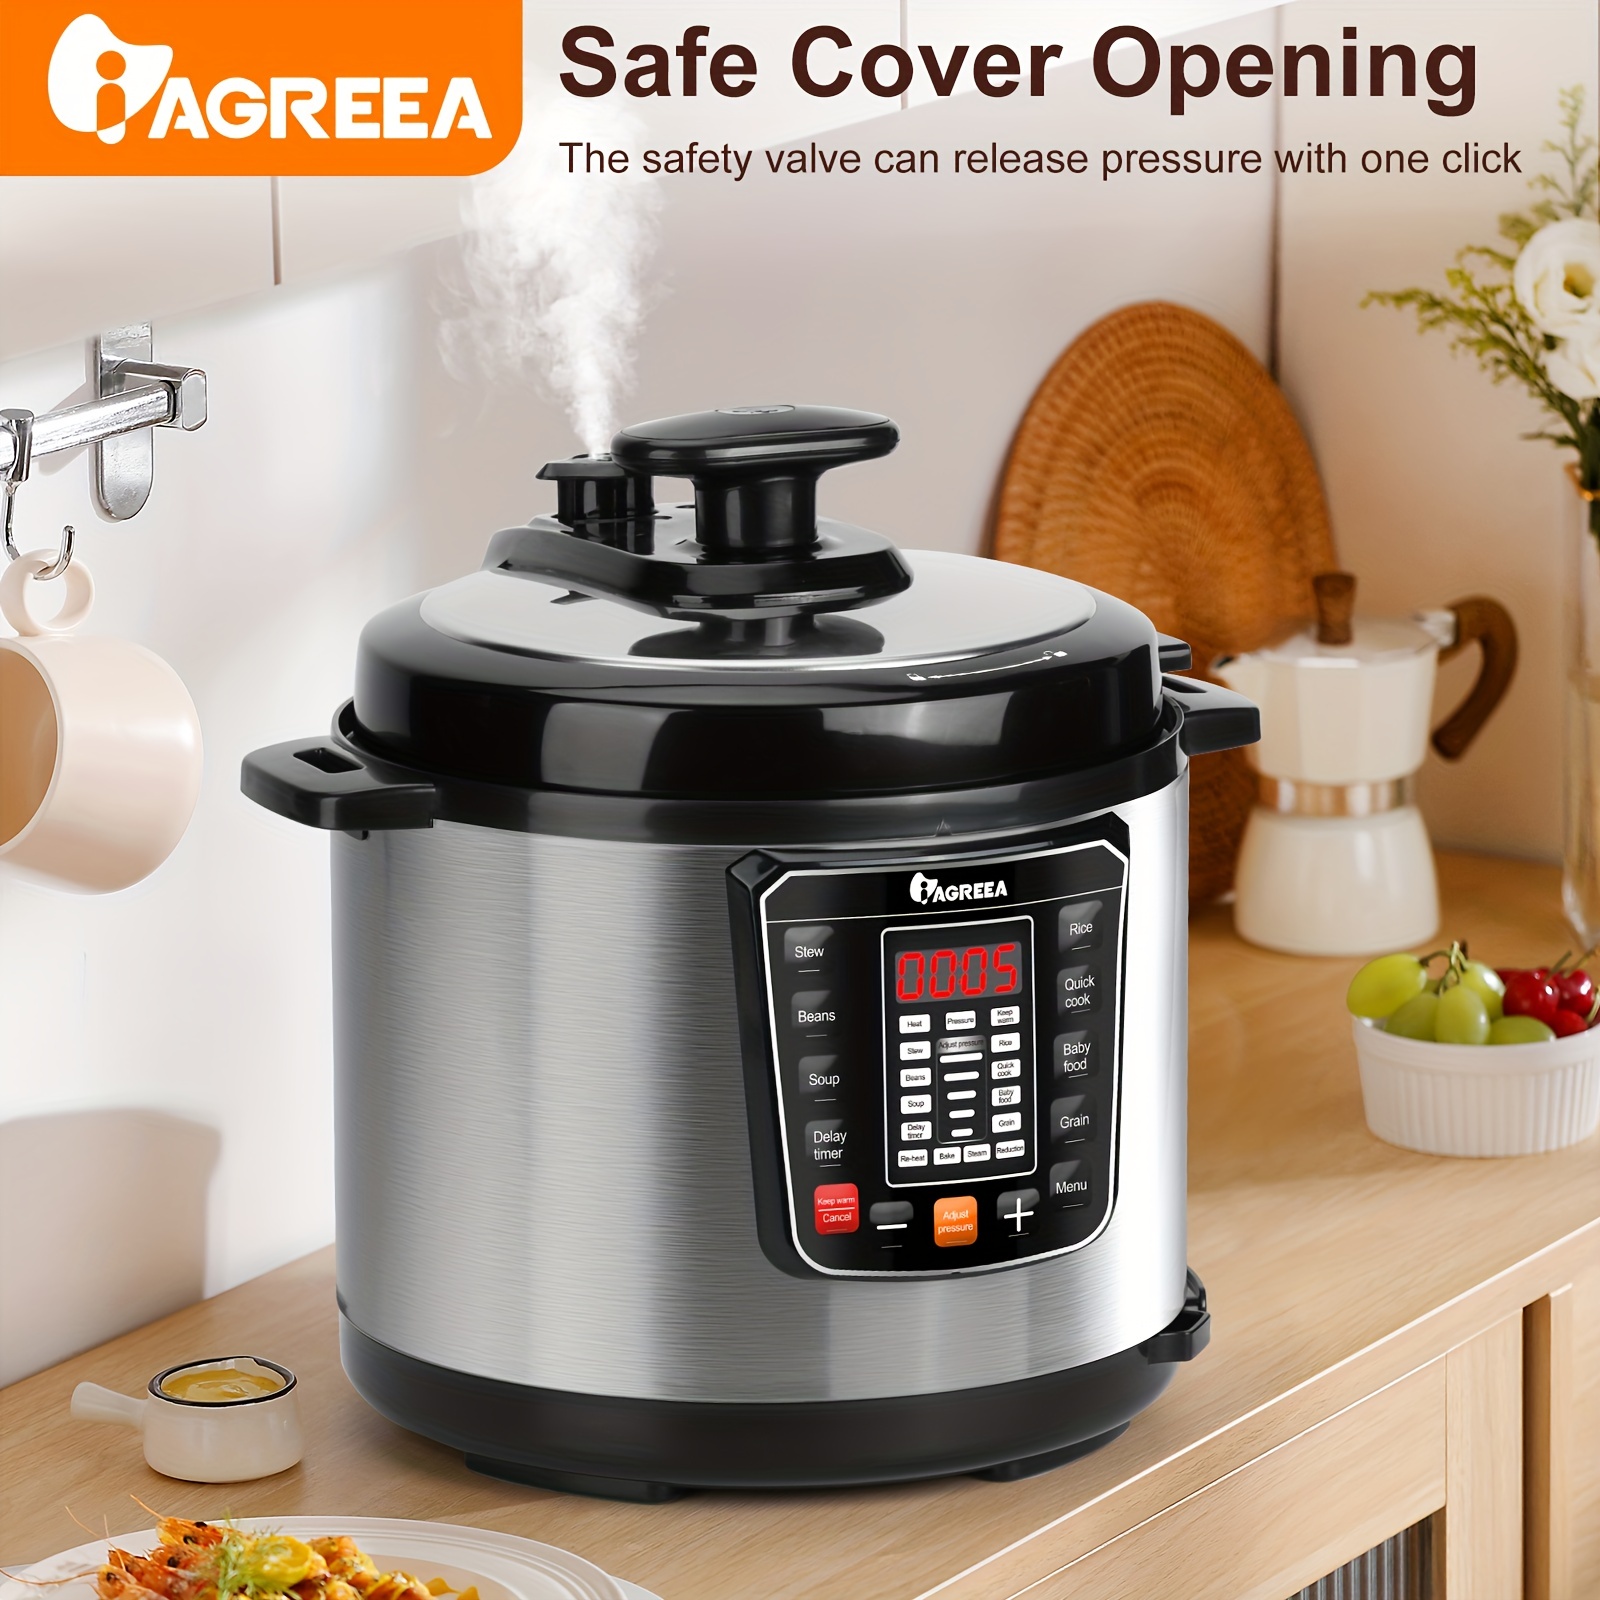 Multifunctional Electric Pressure Cooker - Cook Rice, Soup, Meat,More with  Ease! Olla De Presion Electrica Kitchen Accessories